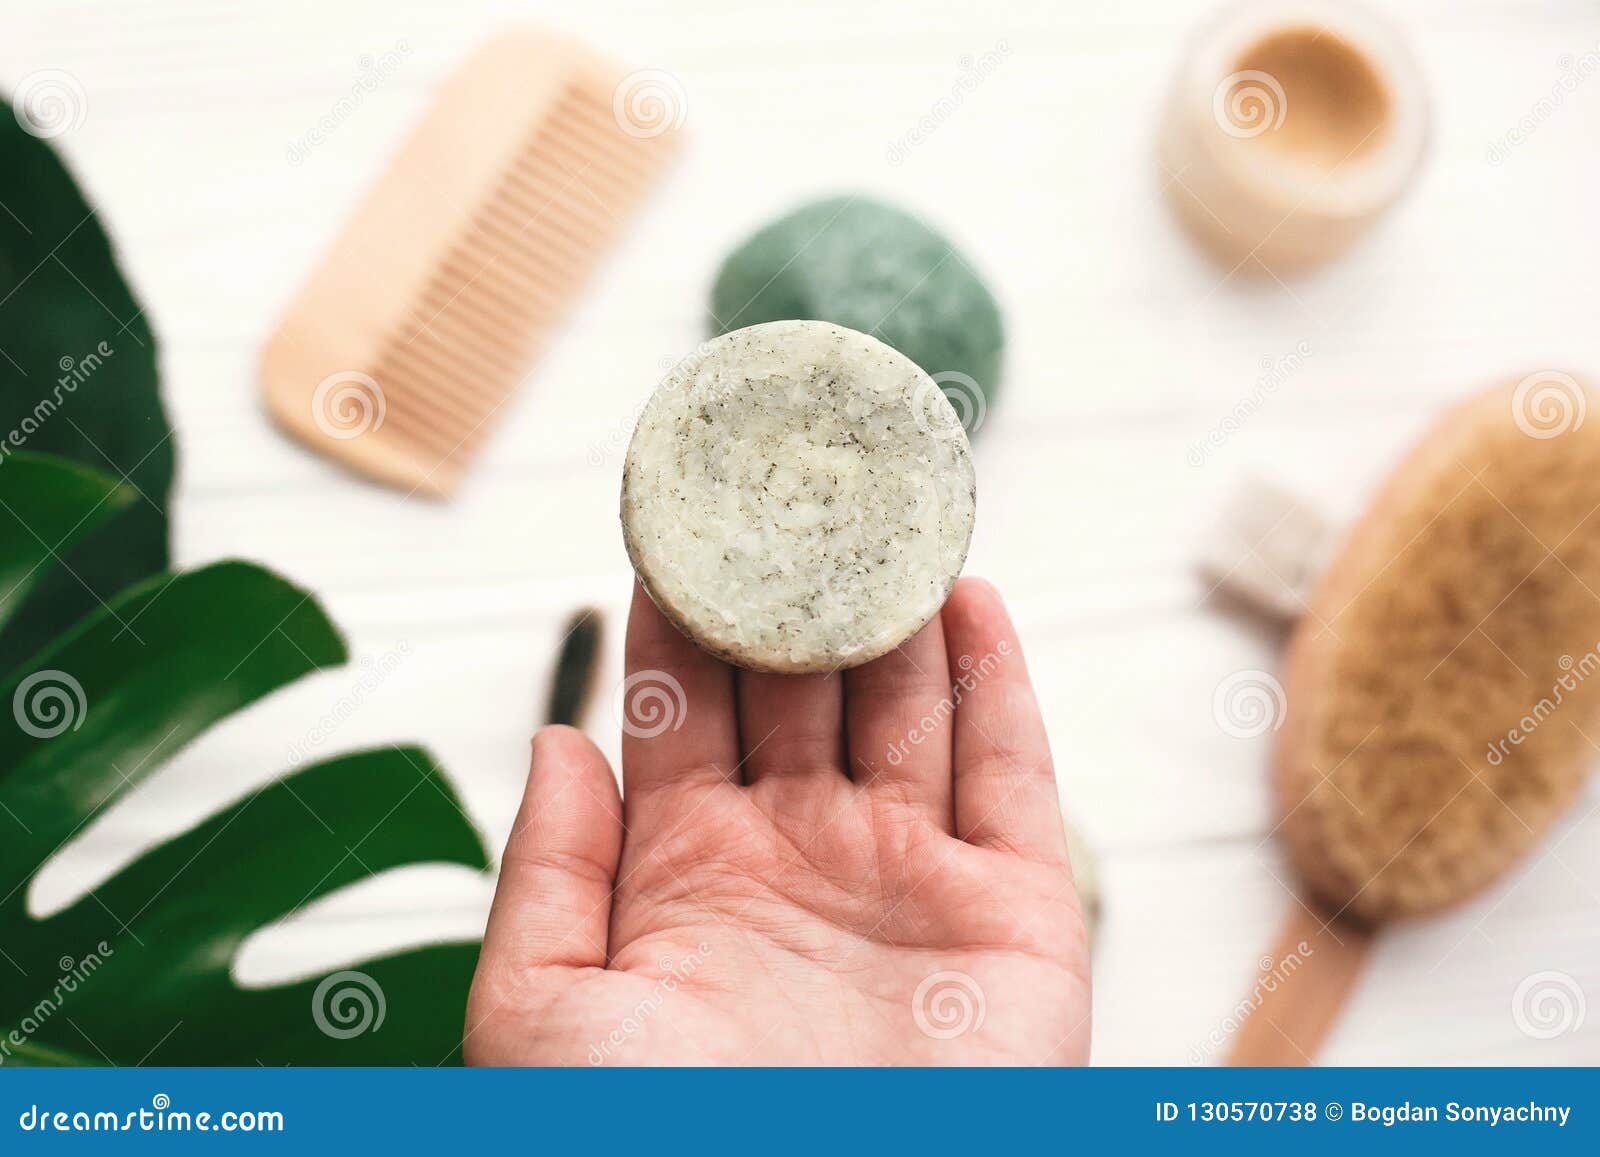 hand holding natural solid shampoo bar on background of bamboo b